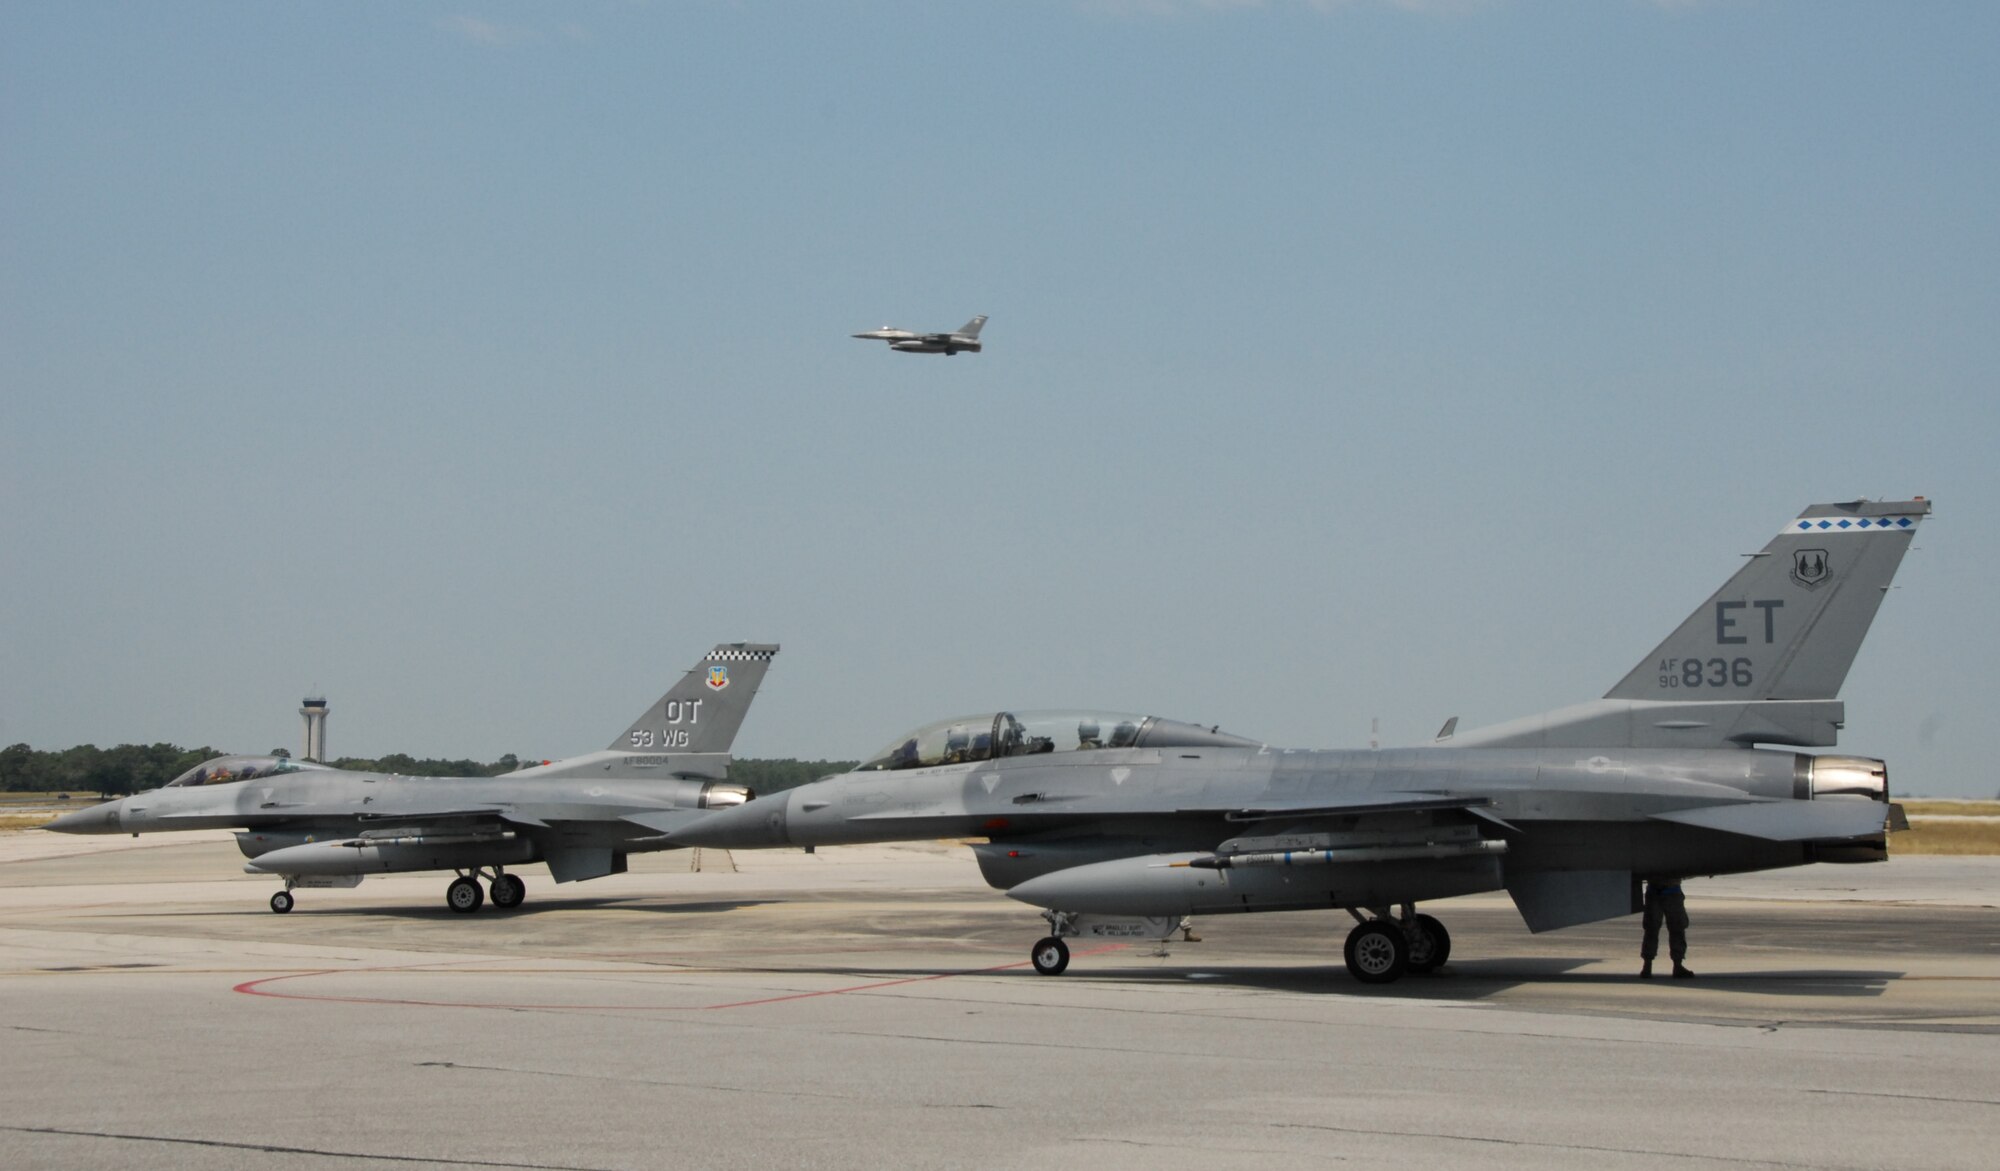 F-16s from the 53rd Wing (left) and the 46th Test Wing (right) arm up before take-off as another F-16 ascends overhead June 25 at Eglin Air Force Base Fla.  (U.S. Air Force photo/Samuel King Jr.)